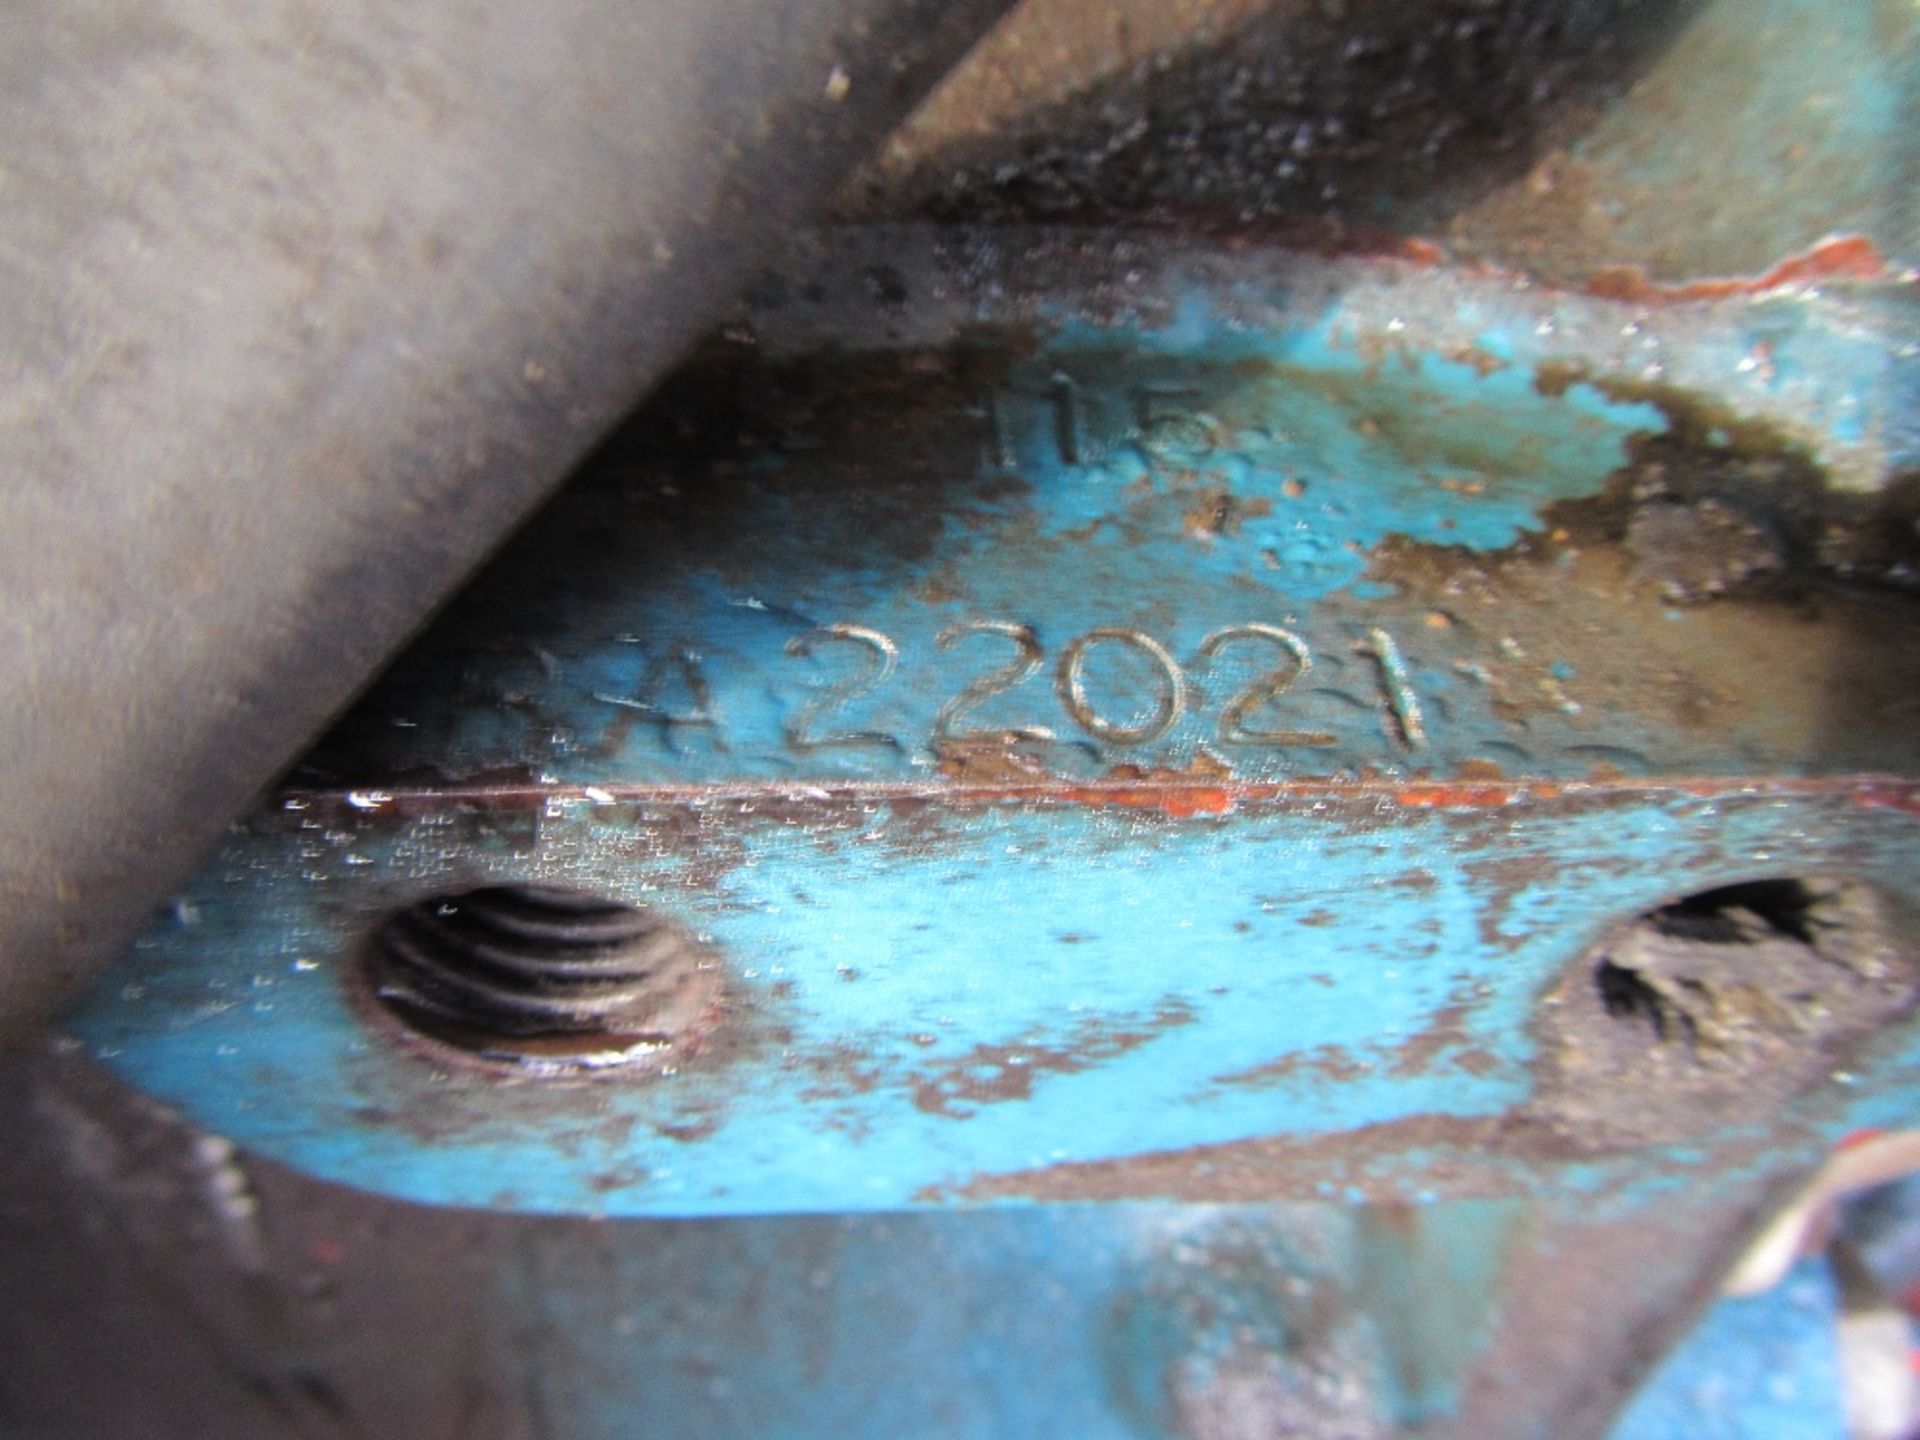 Ford 5610 2wd Tractor c/w Floor Change Gearbox. Reg. No. B621 UOW Ser. No. BA22021 - Image 10 of 10